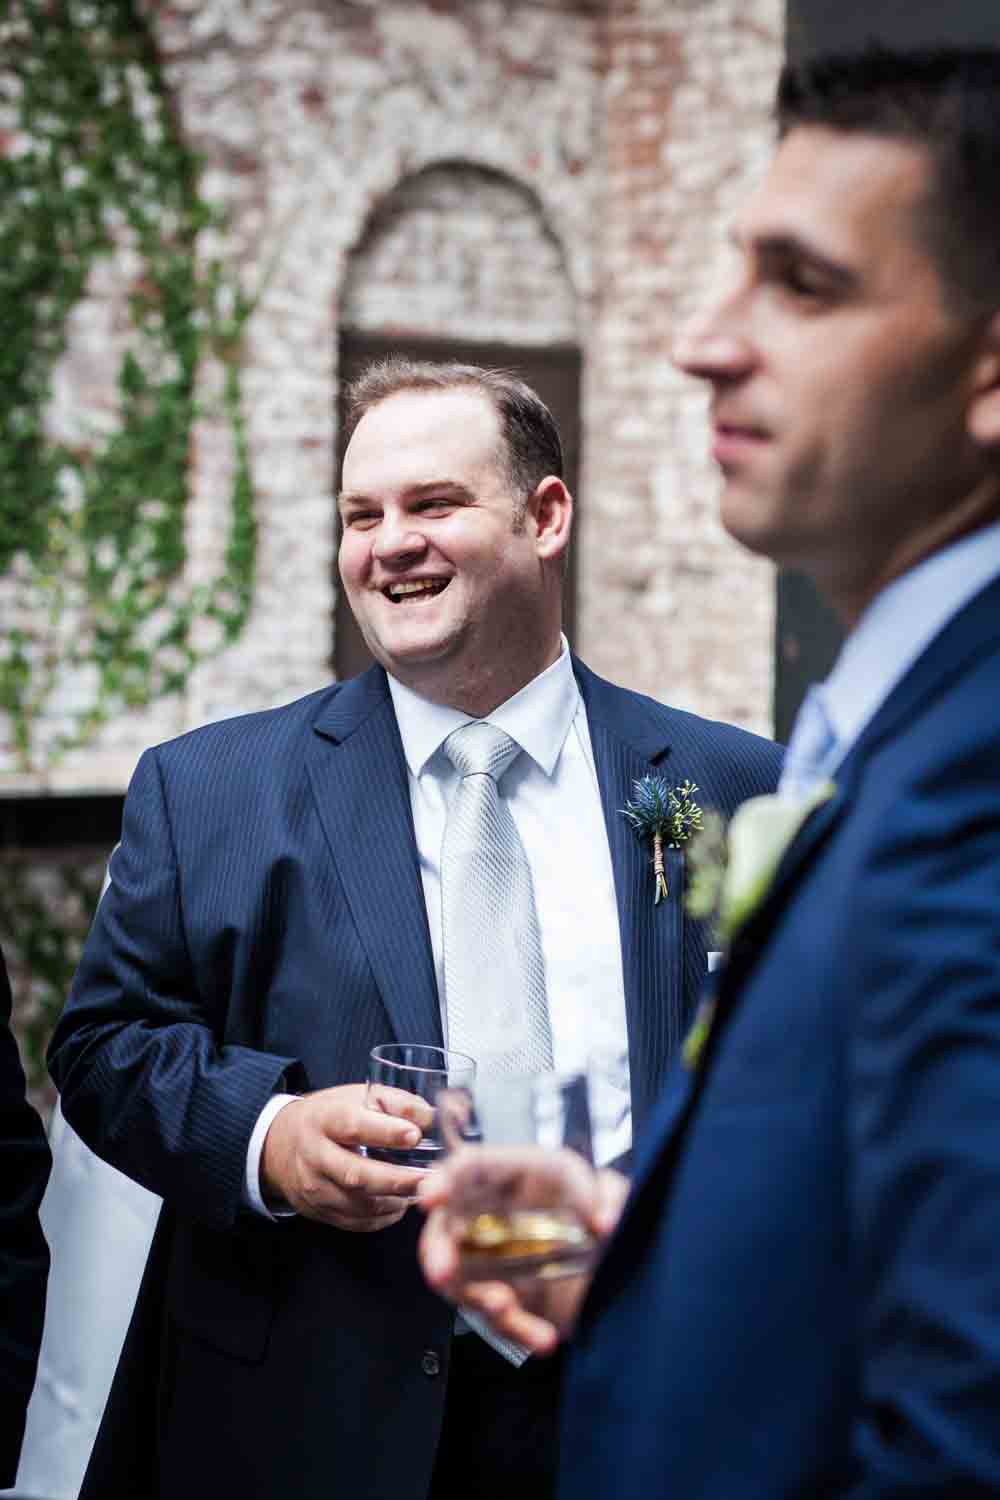 Groomsmen talking with other groomsmen and holding glass of scotch